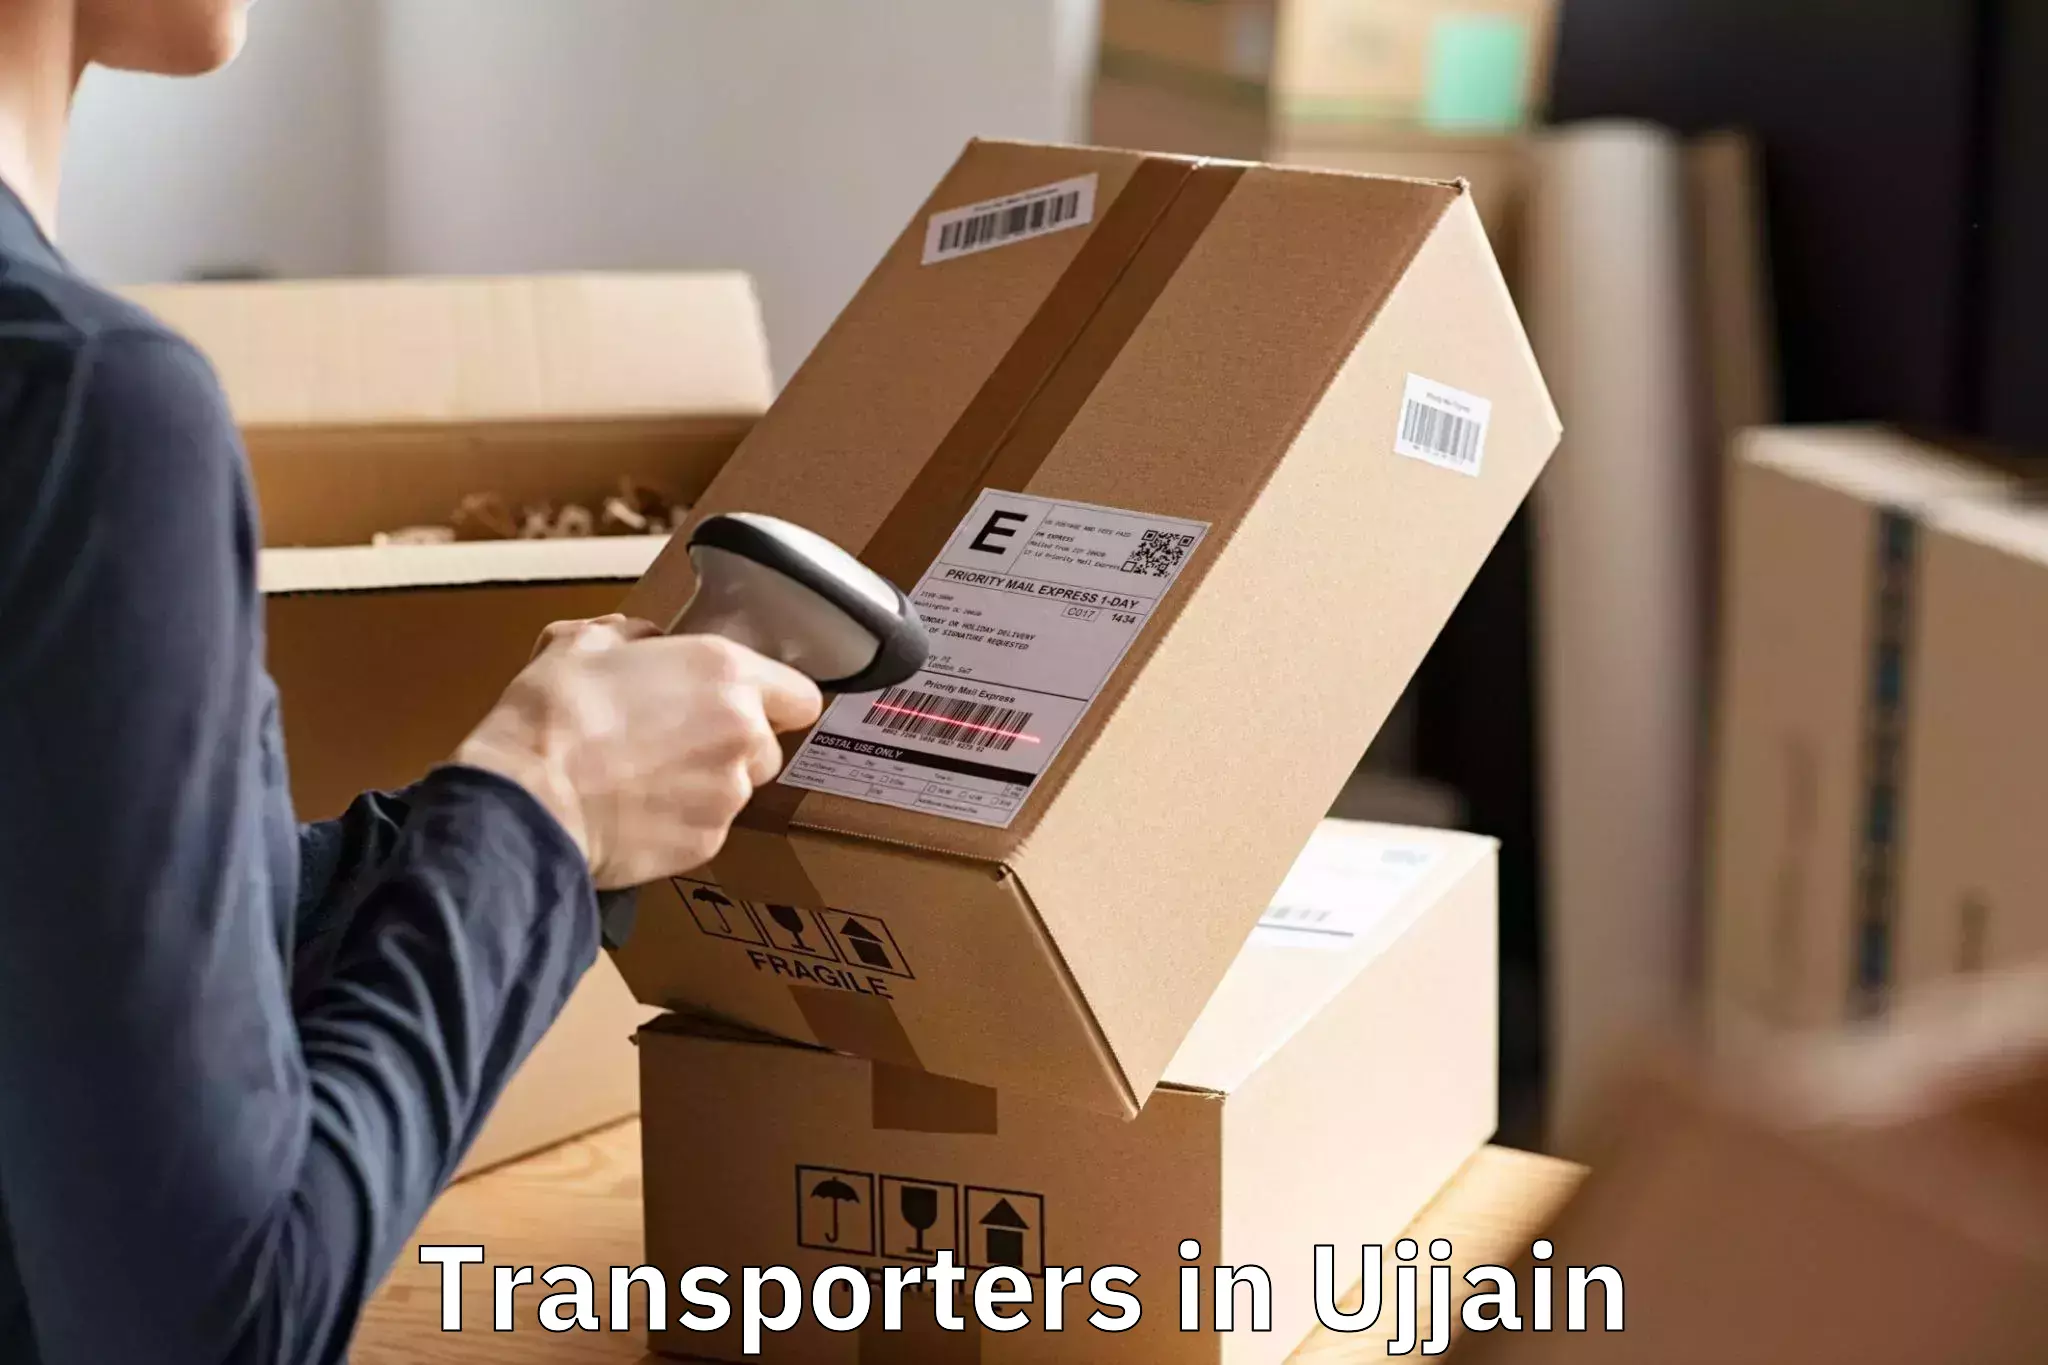 Reliable Transporters Available in Ujjain, Madhya Pradesh (MP)